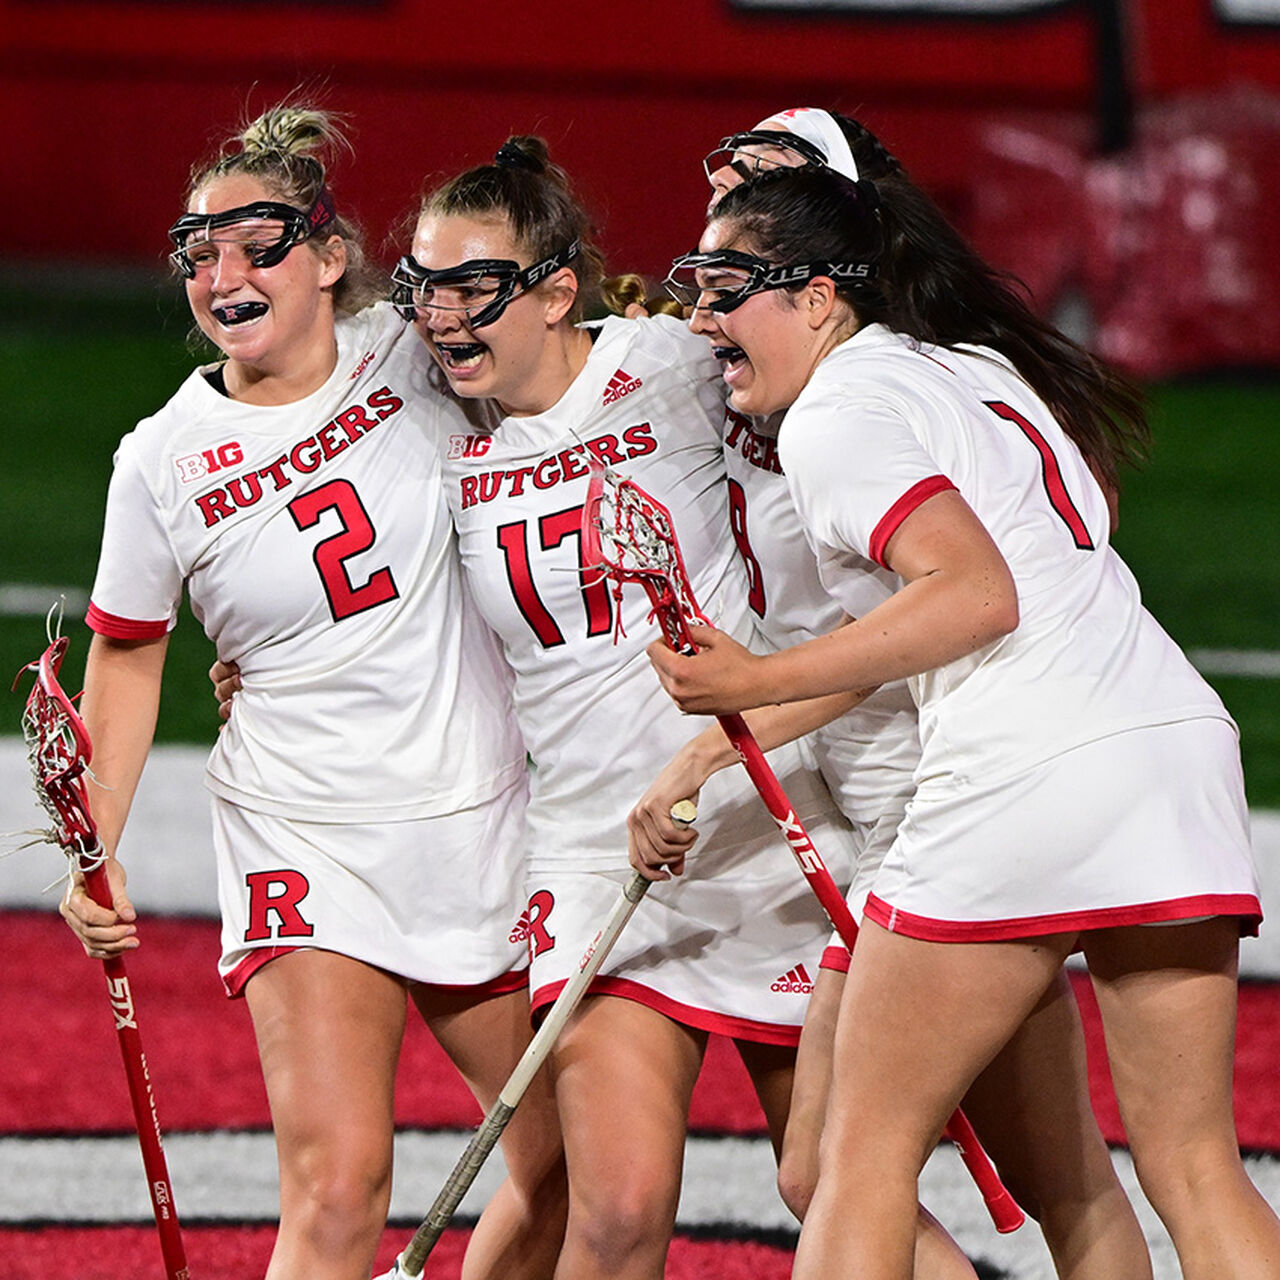 Rutgers women's lacrosse players image number 2